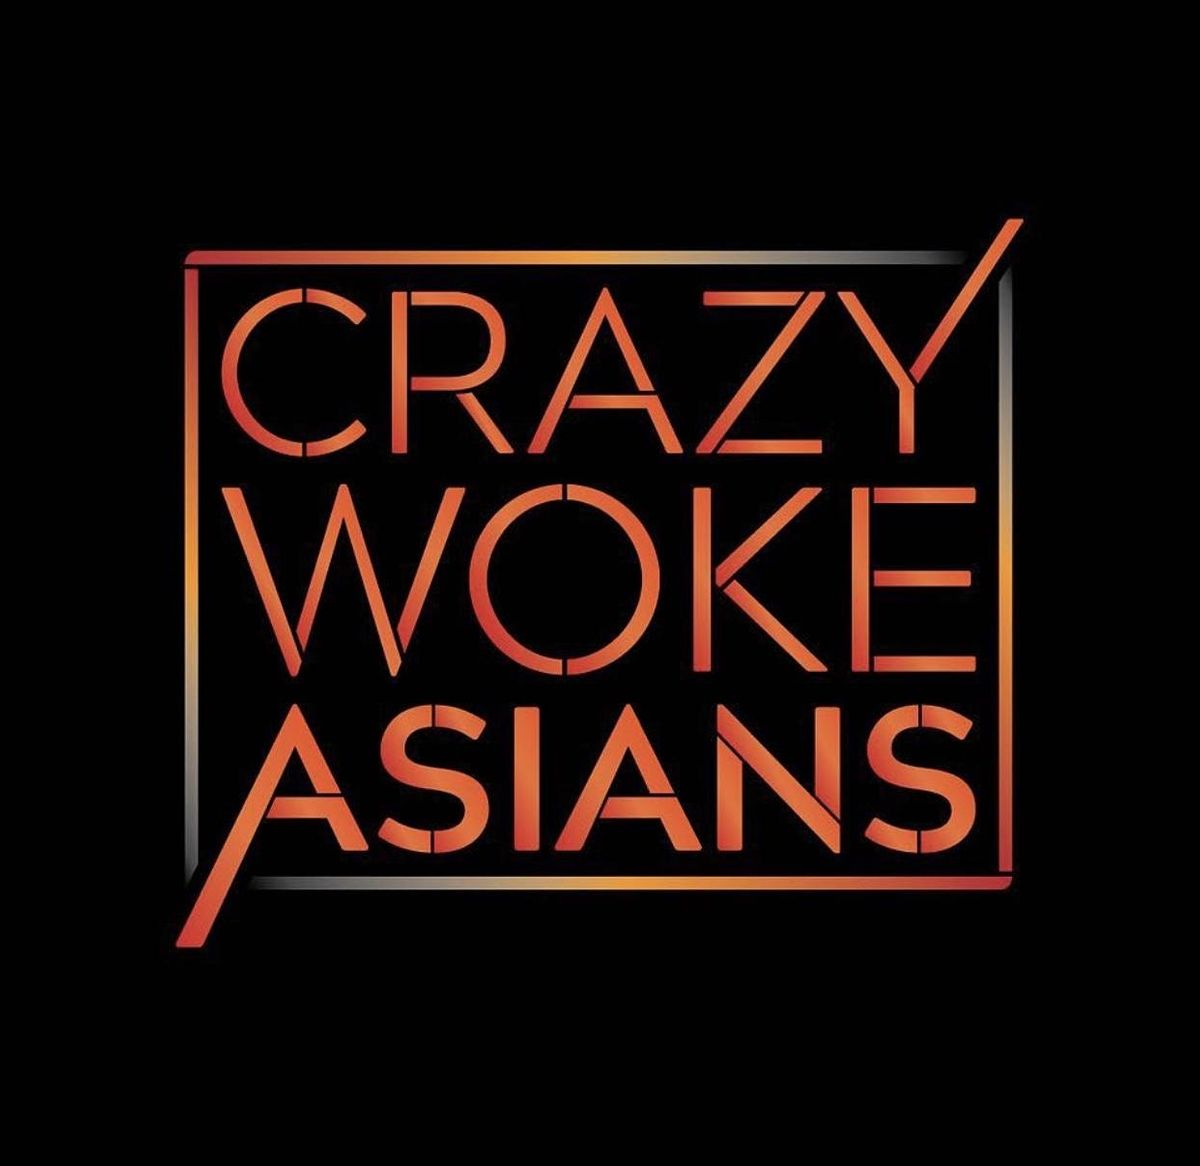 CRAZY WOKE ASIANS LIVE IN NEW YORK ST MARKS COMEDY CLUB! ONE NIGHT ONLY!